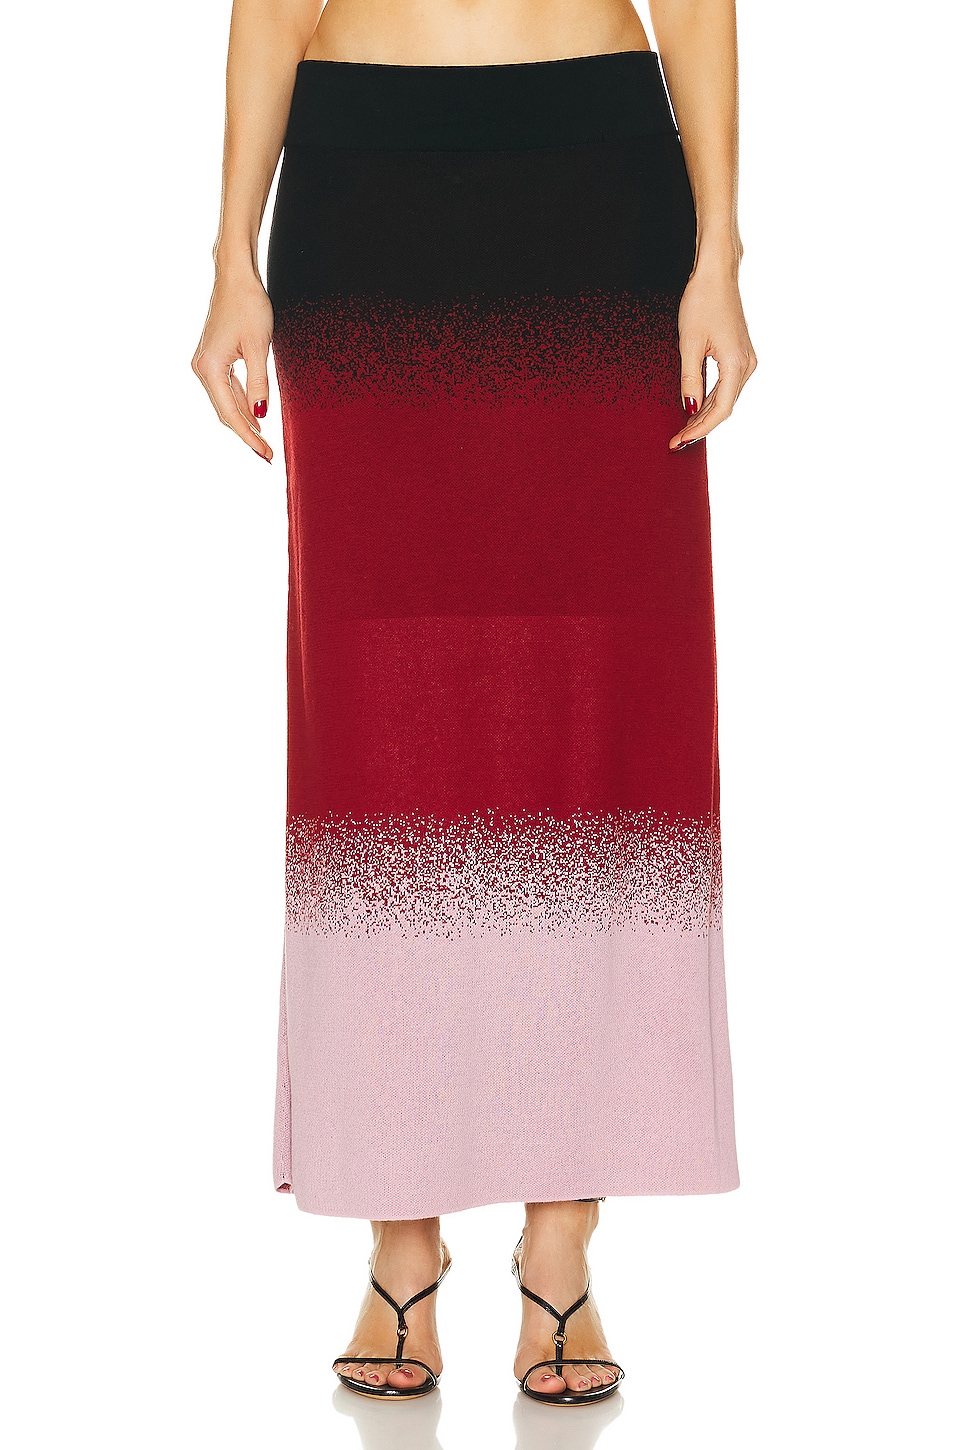 Image 1 of Johanna Ortiz Color Scapes Midi Skirt in Black, Lilac, & Red